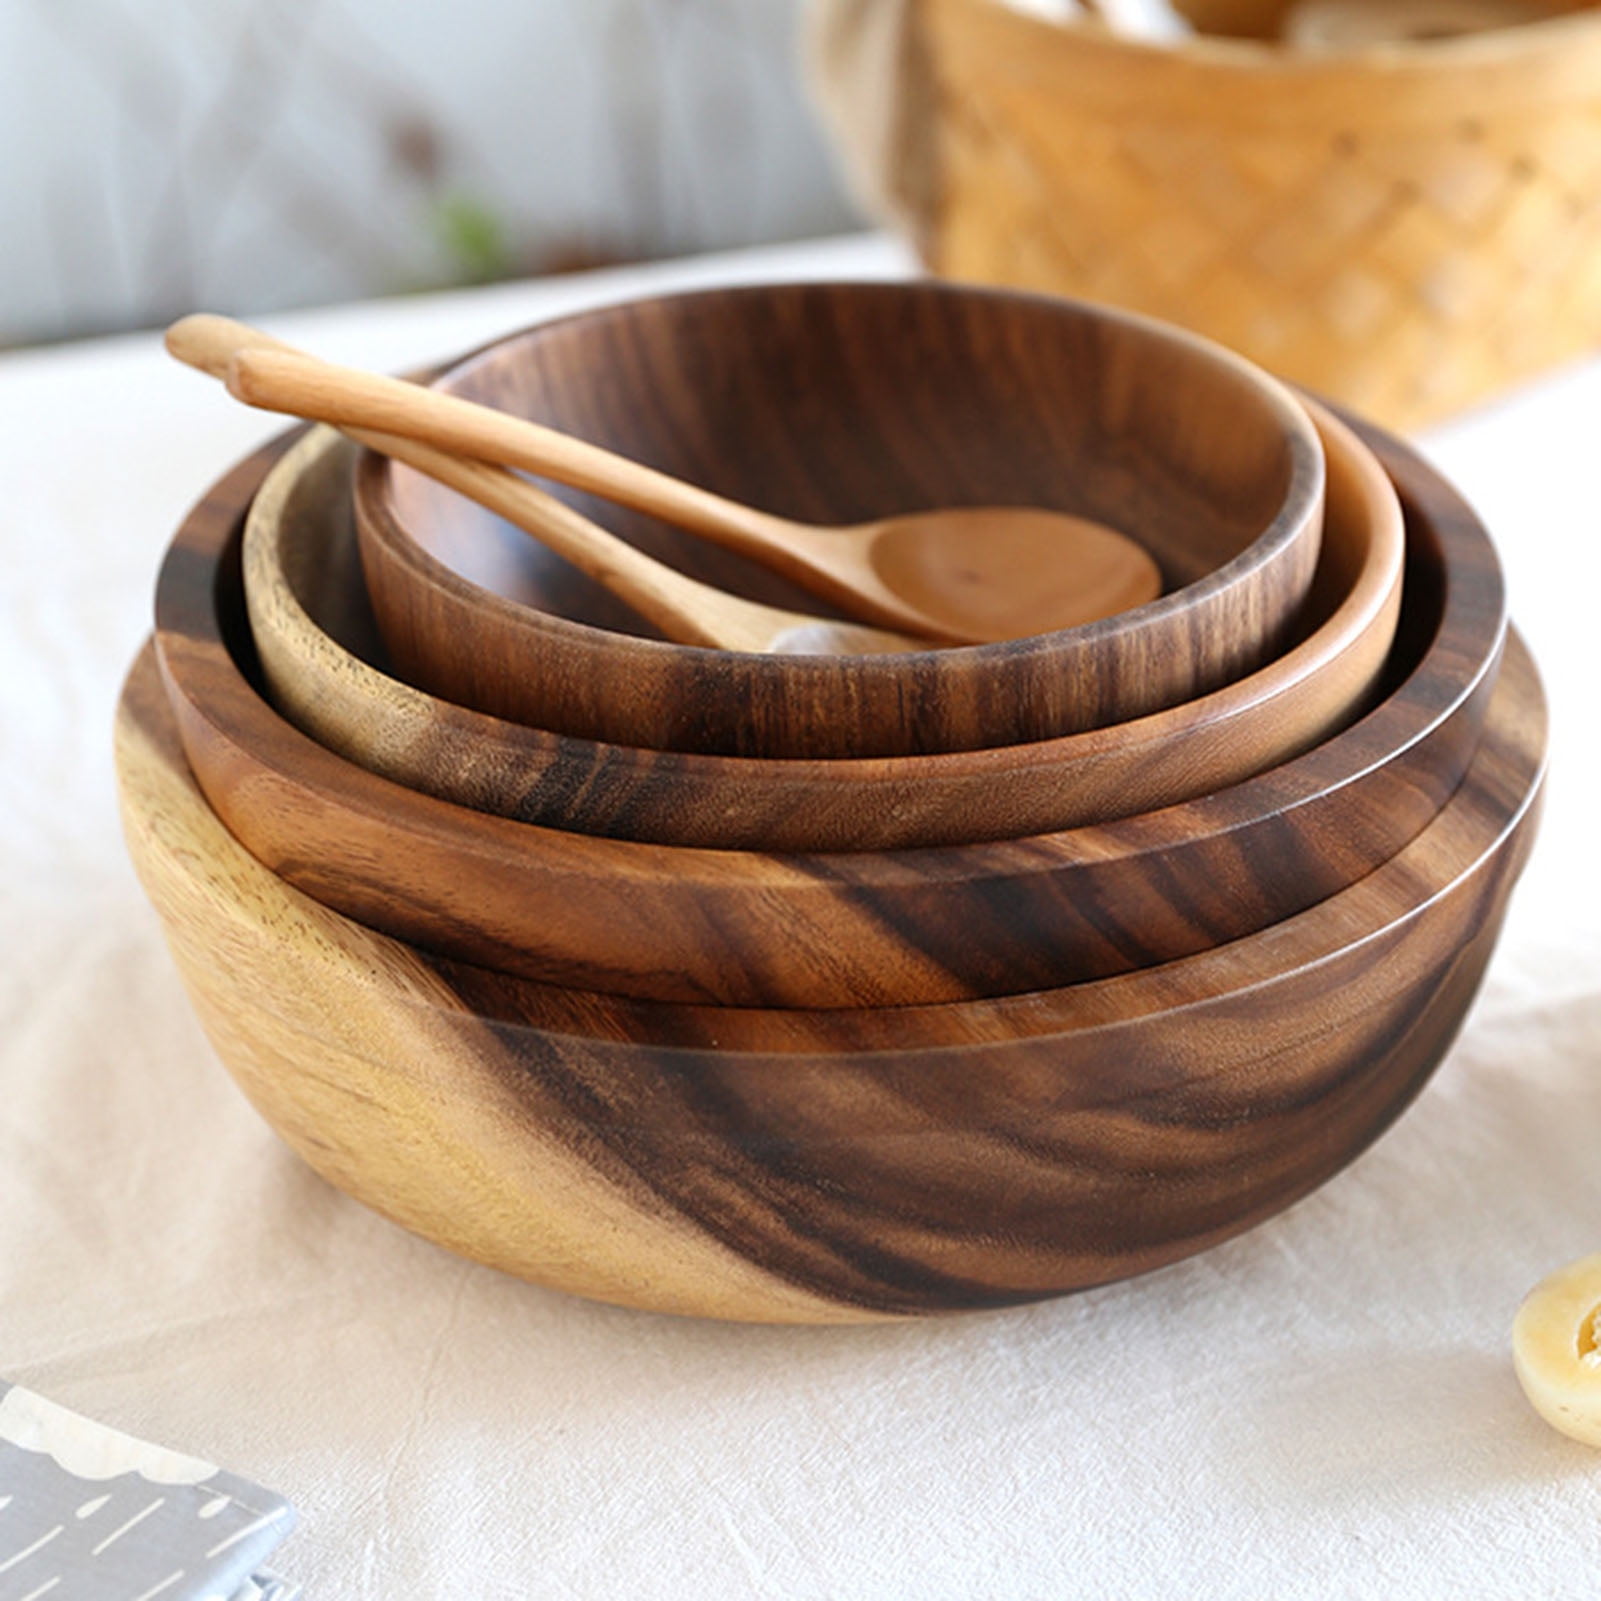 Wooden Salad Bowl- 9.4 Inch Wood Salad Wooden Bowl With Spoon, Can